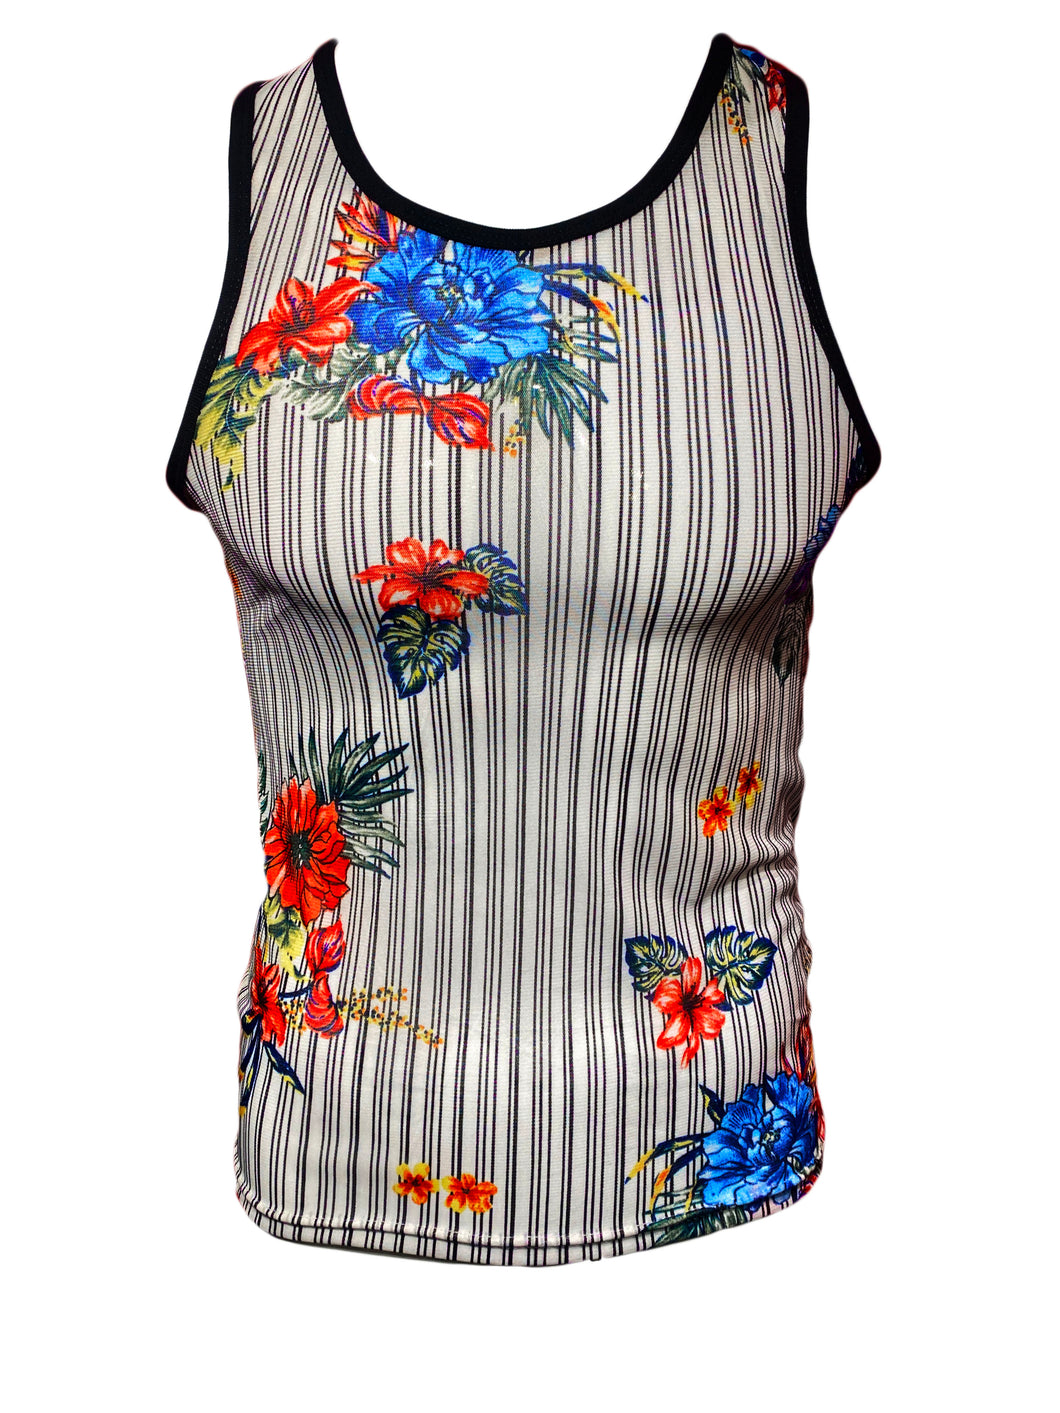 Made in SF Tank -White Black Pinstripes Floral Mesh